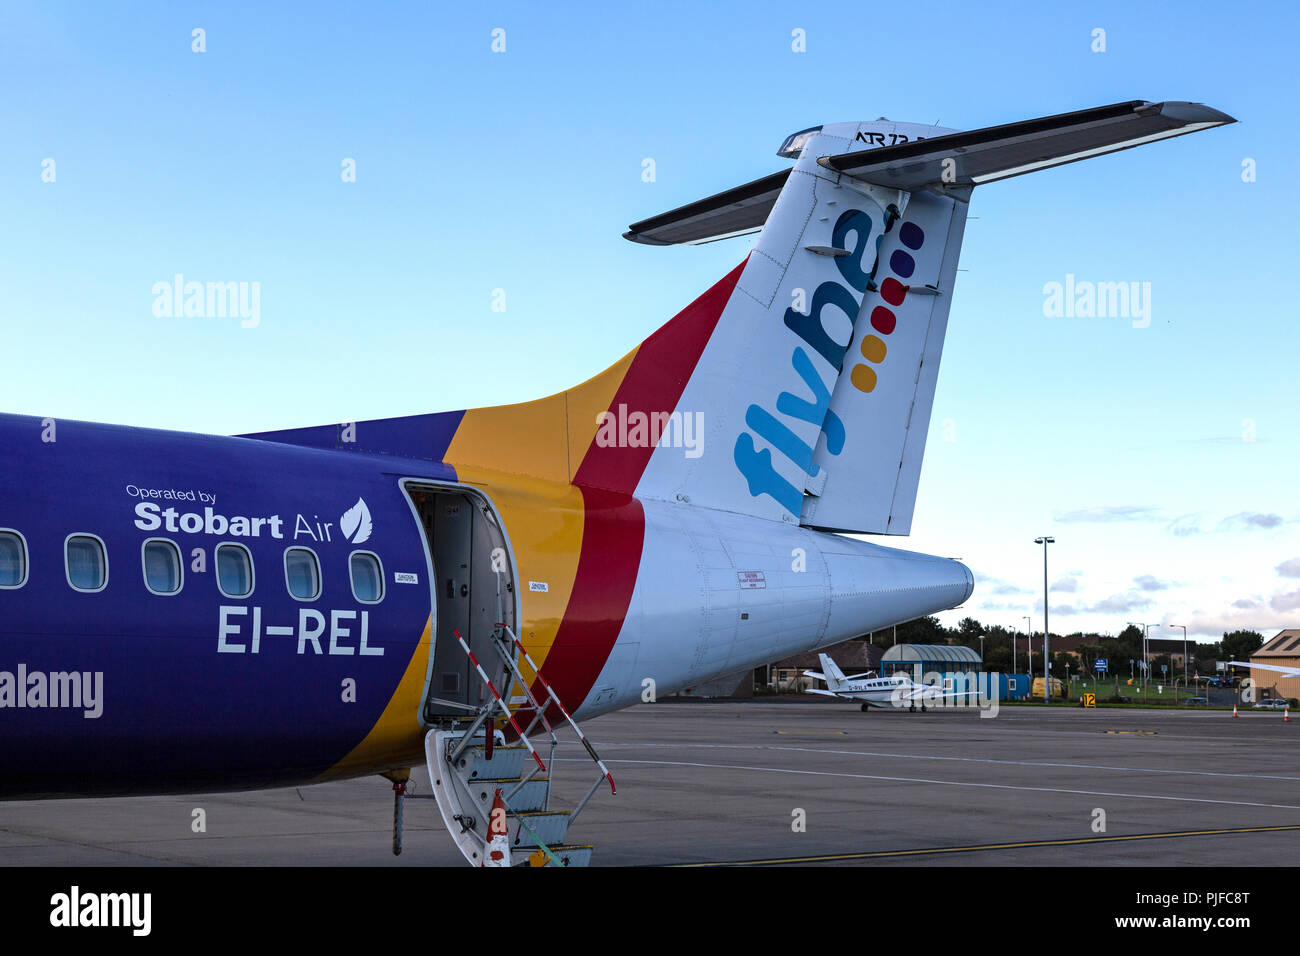 The tail of an ATR-72 aeroplane owned by the British Airline, Flybe, and operated by Stobart Air. Photograph taken at Ronaldsway Airport, Isle Of Man. Stock Photo